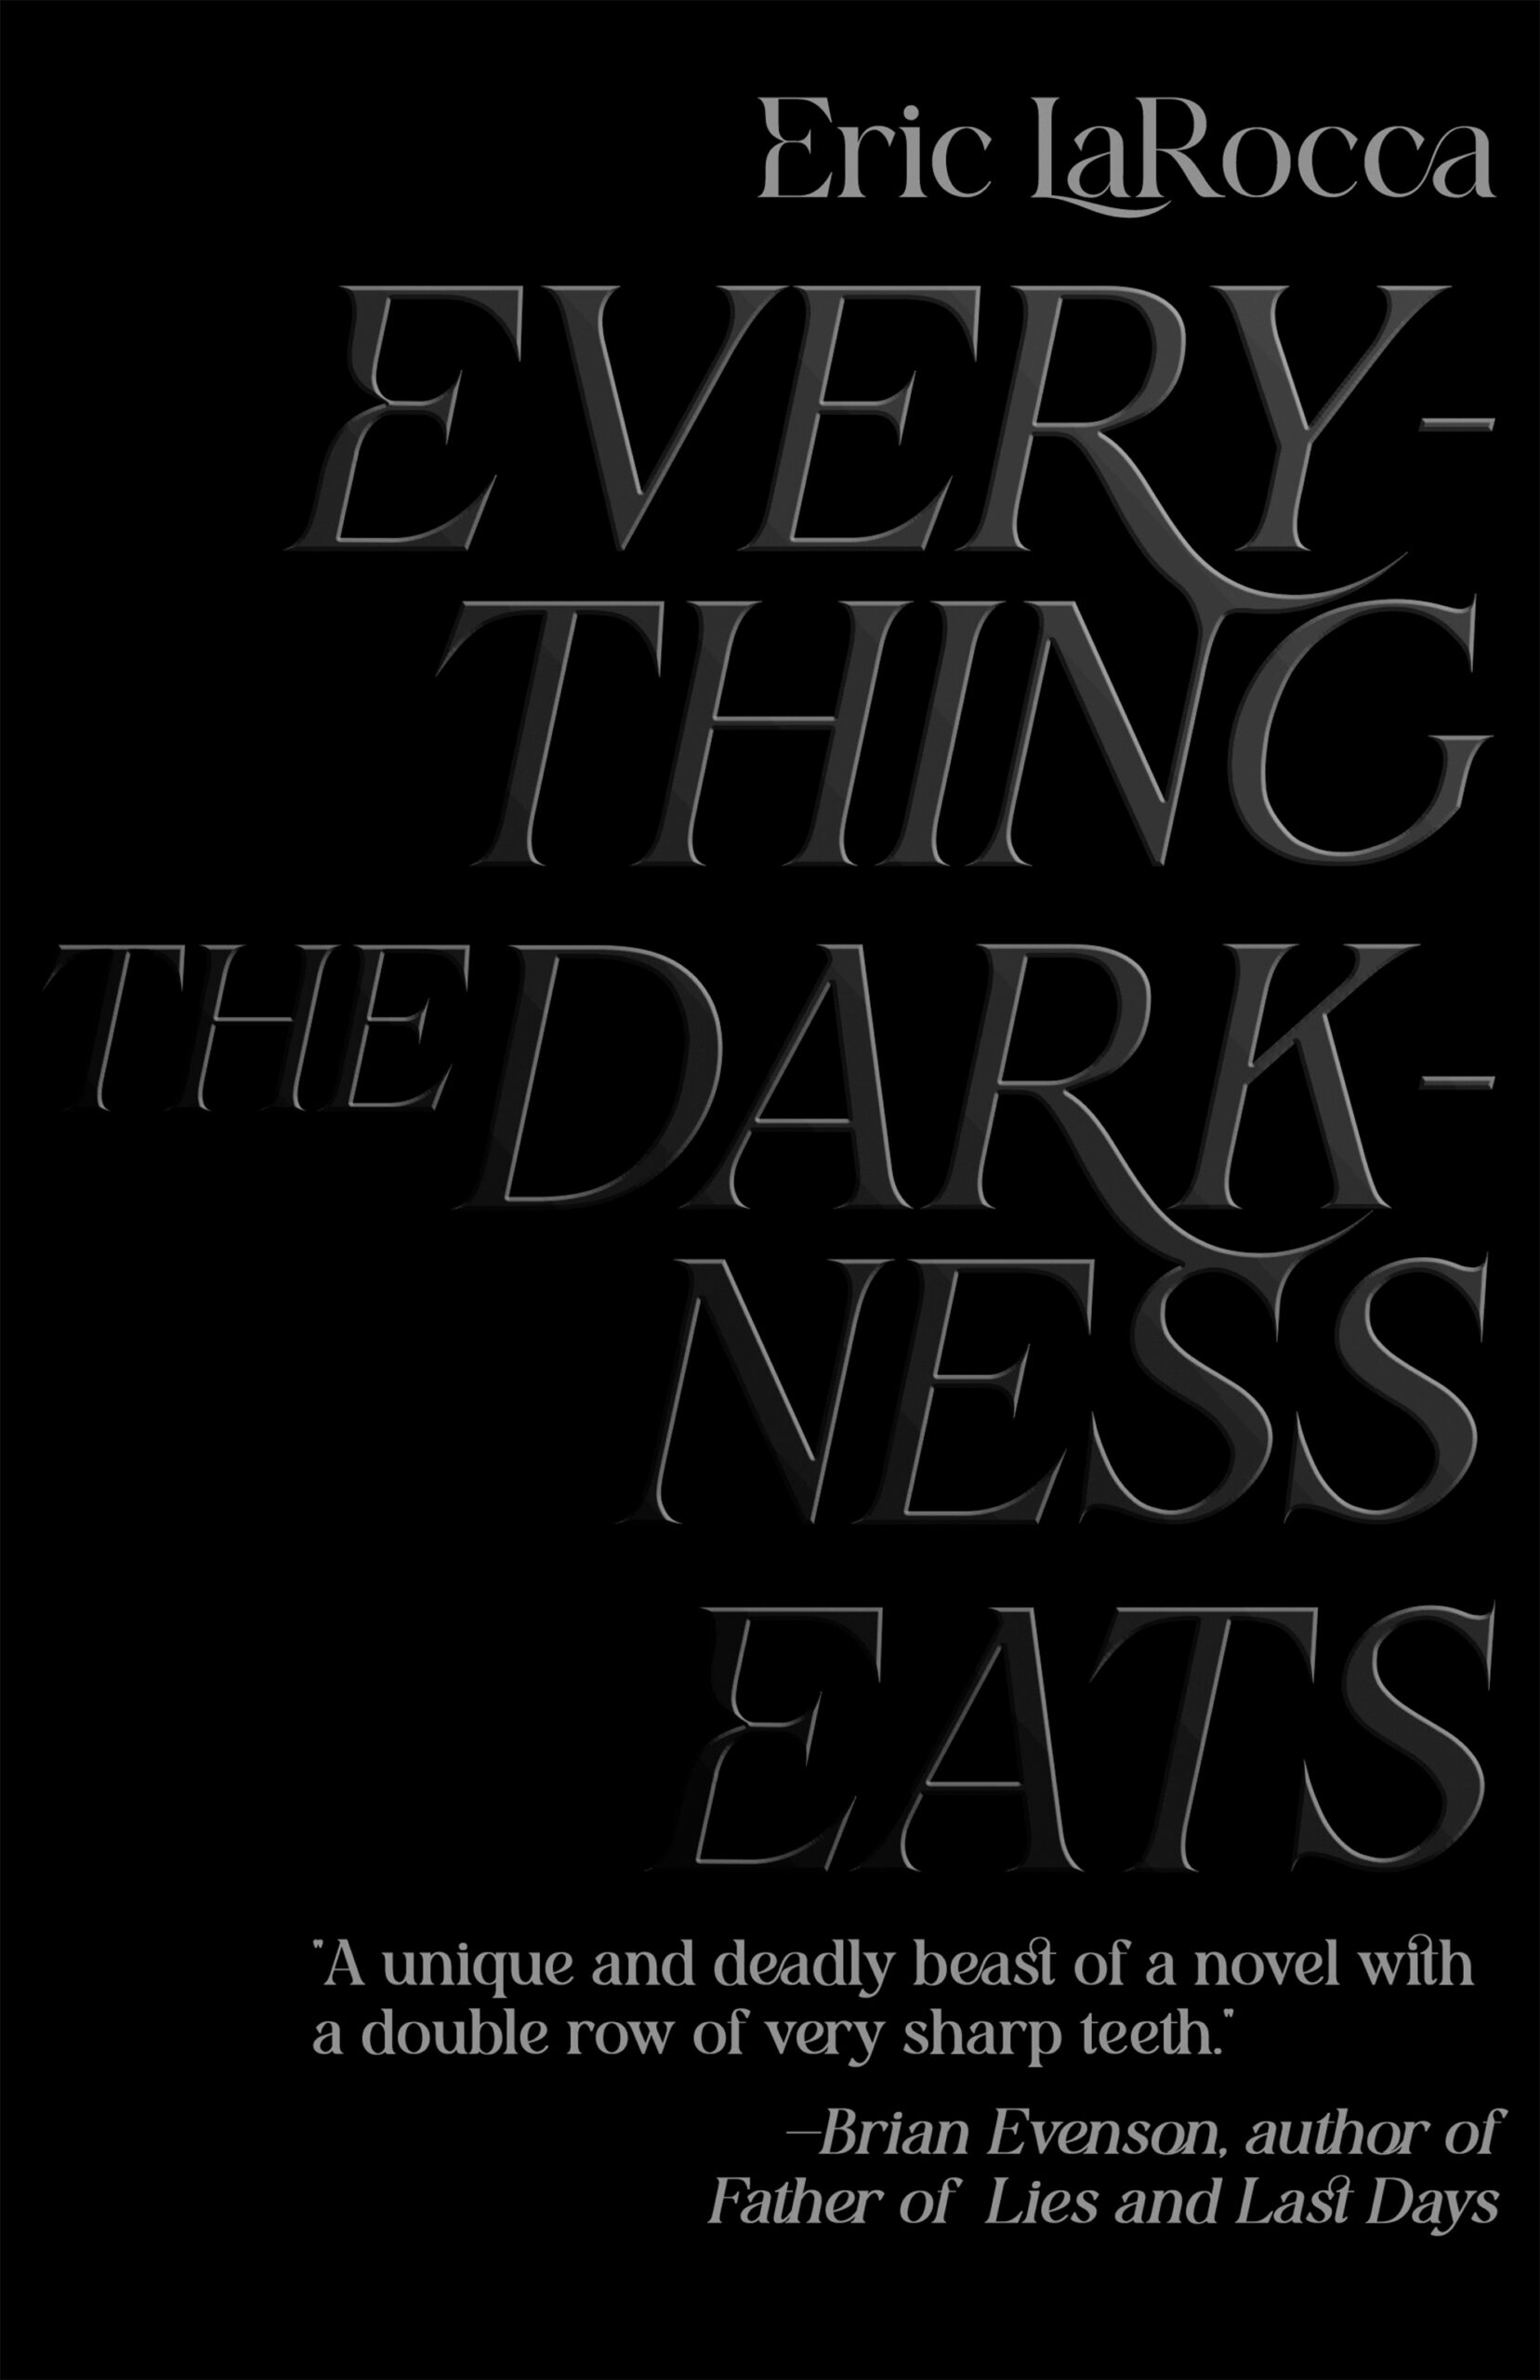 
					Cover art from "Everything the Darkness Eats" by Eric LaRocca